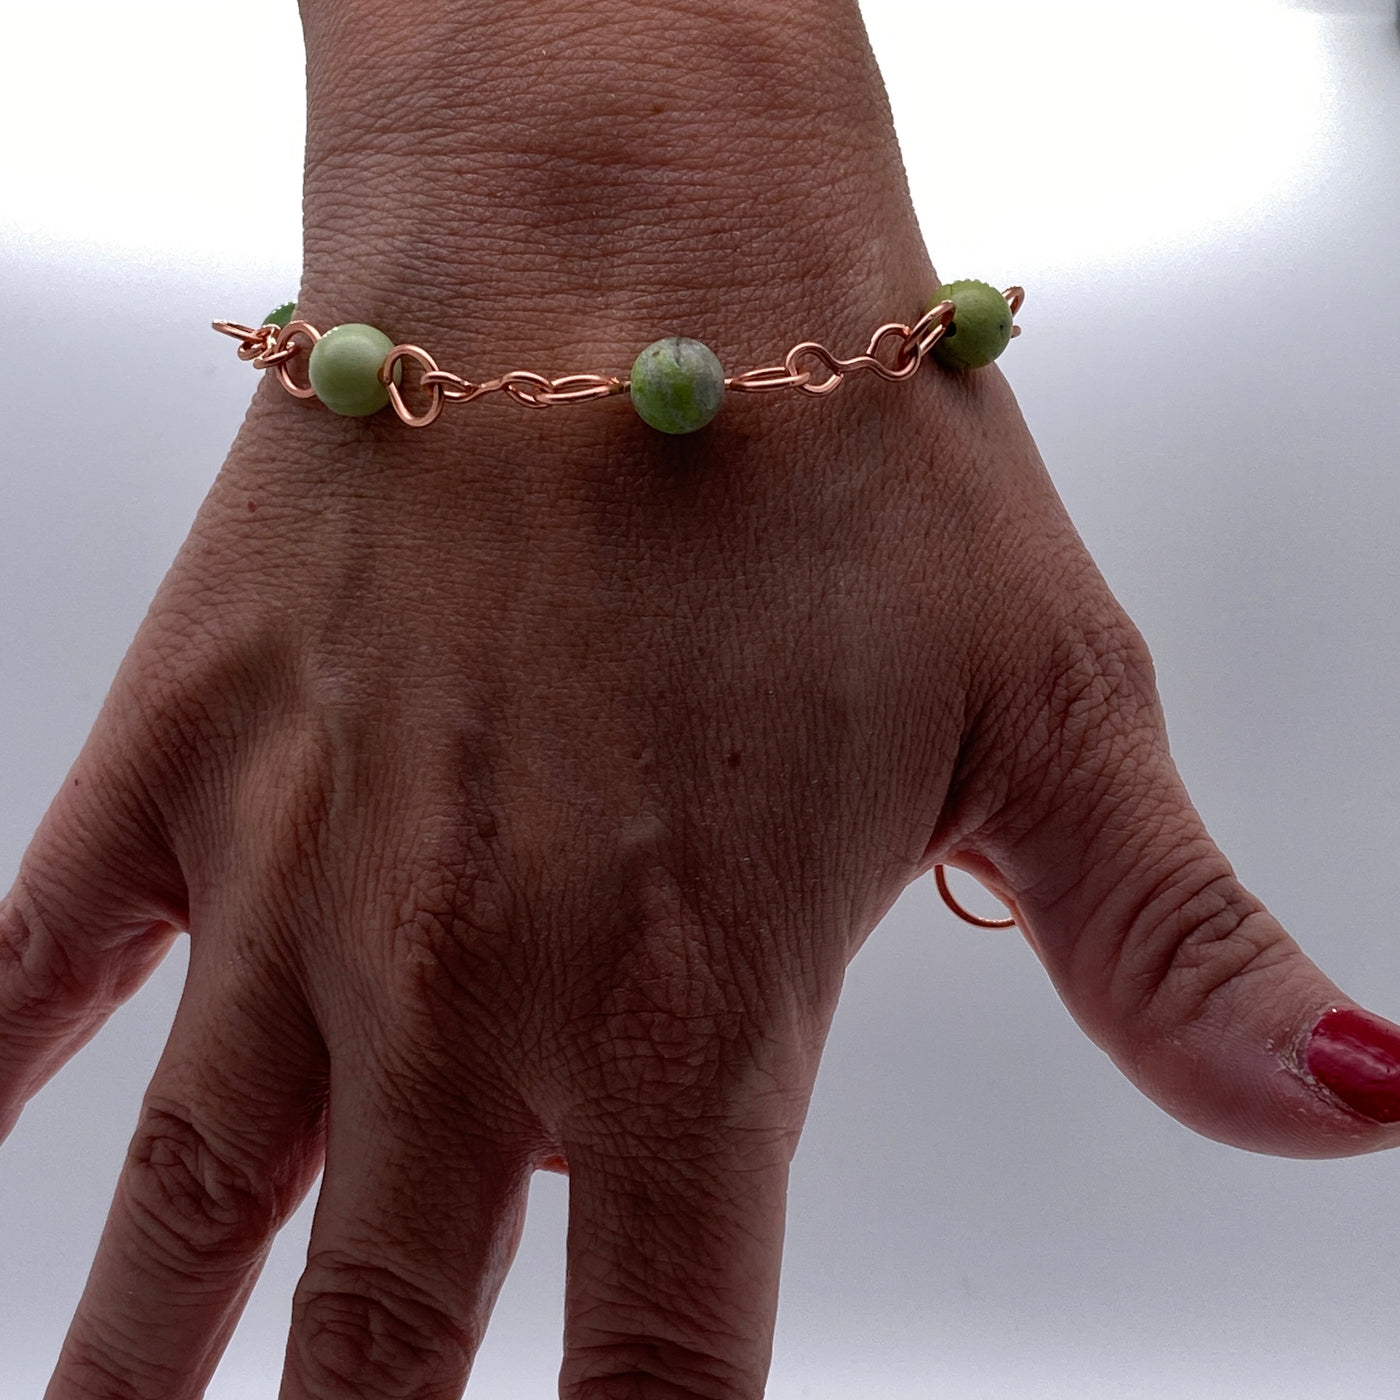 Green tourquoise and wire bracelet.